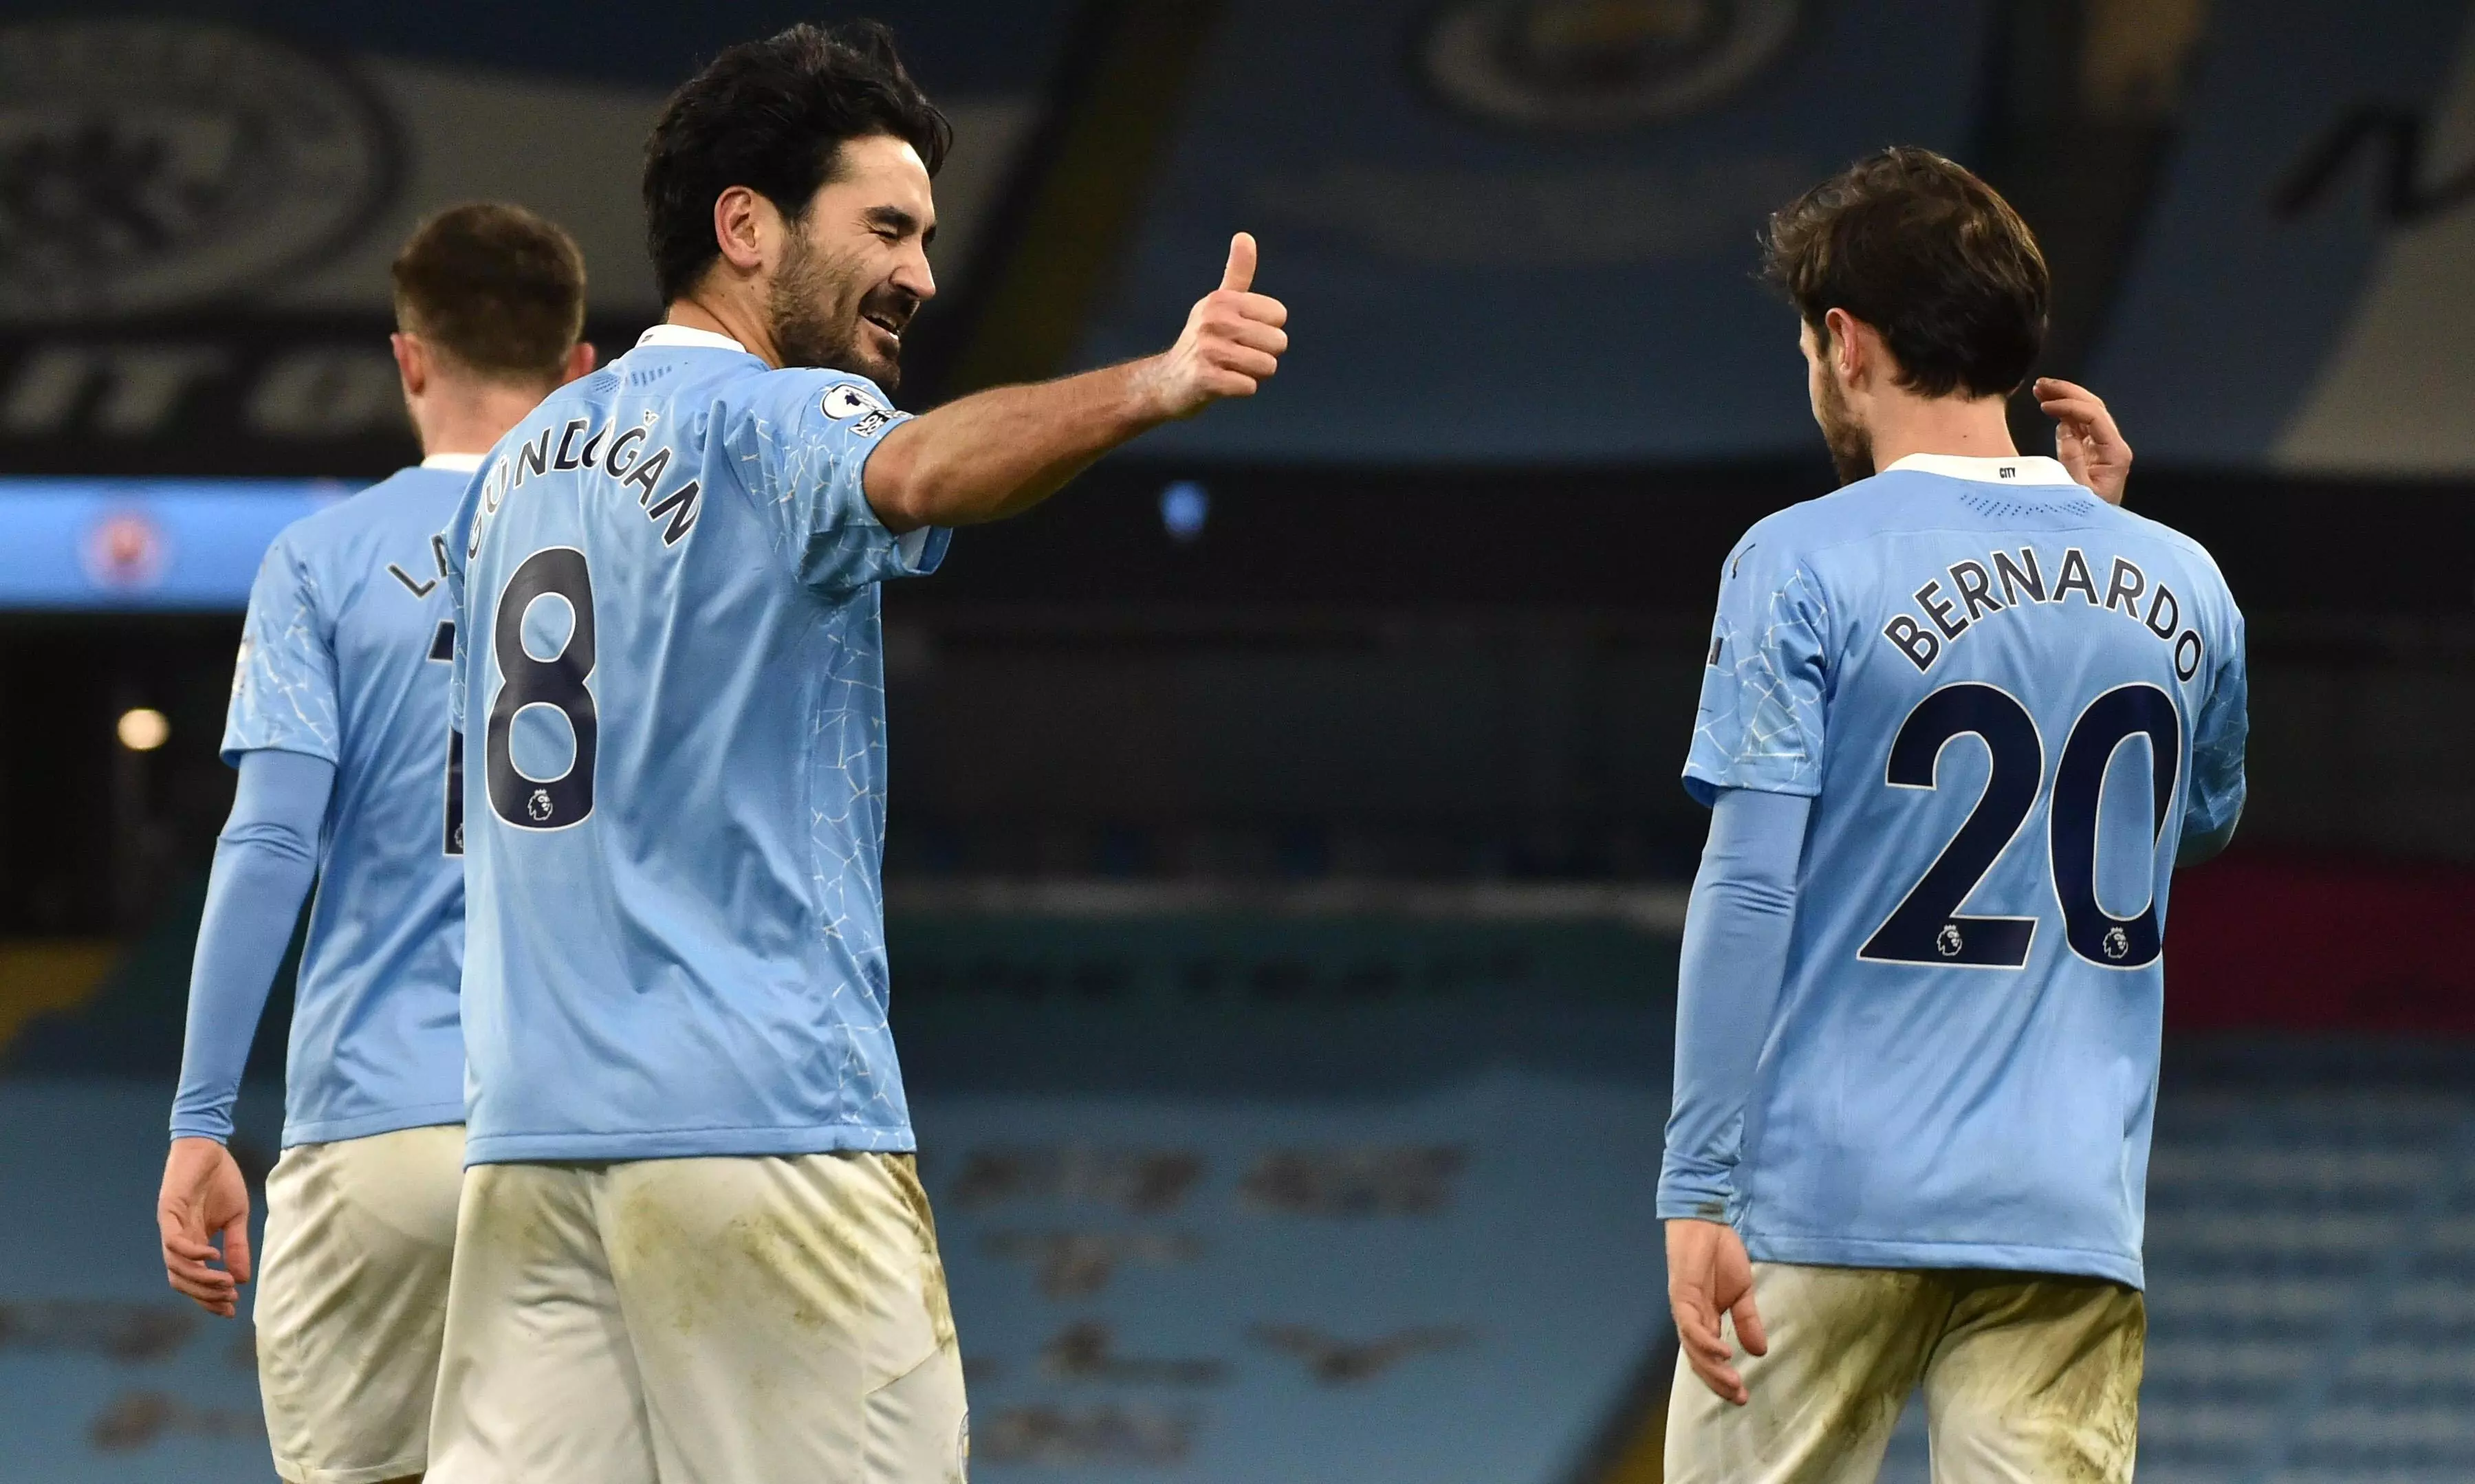 EPL: Manchester City continues unbeaten